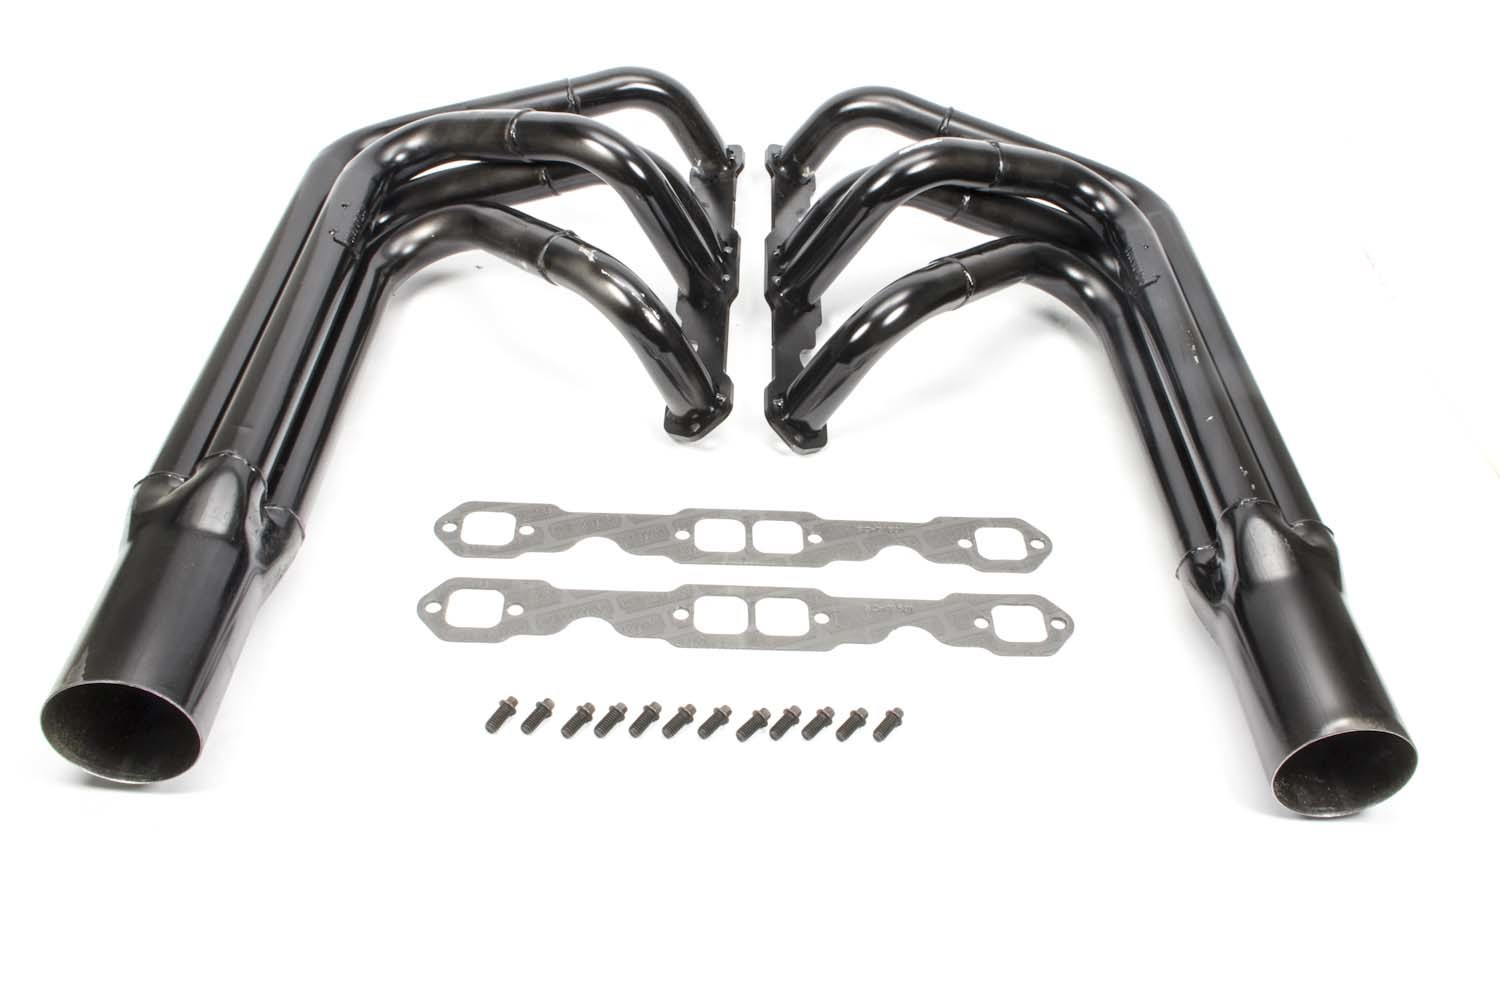 Schoenfeld Headers 1012LV Headers, Sprint, 1-5/8 to 1-3/4 in Primary, 3-1/2 in Collector, Steel, Black Paint, Small Block Chevy, Pair